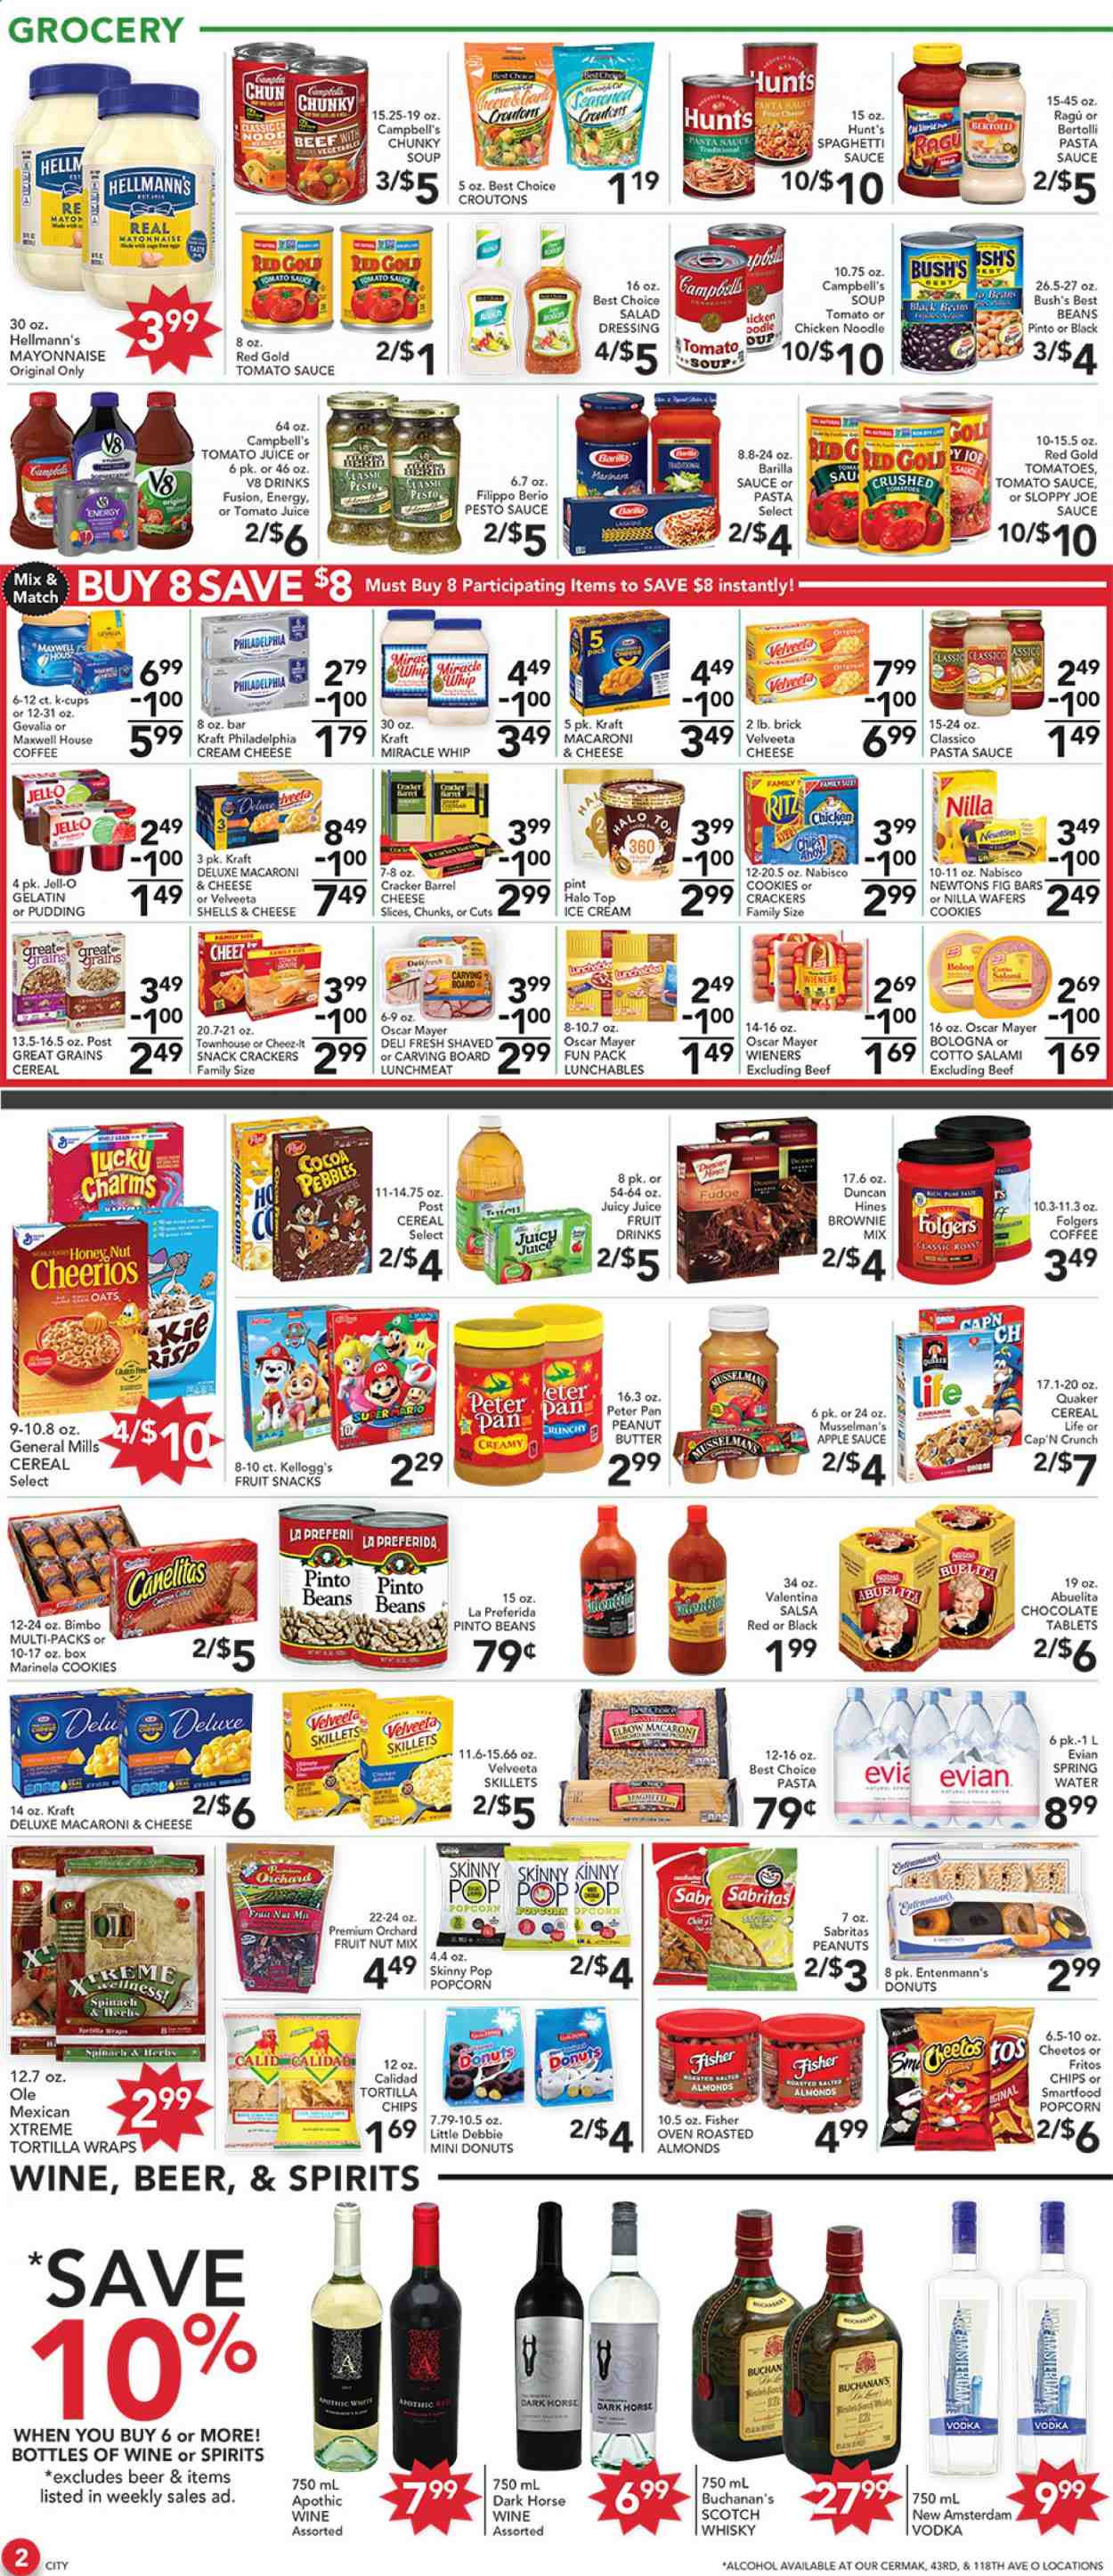 thumbnail - Pete's Fresh Market Flyer - 01/13/2021 - 01/19/2021 - Sales products - brownie mix, donut, Entenmann's, Campbell's, cream cheese, macaroni & cheese, tomato soup, soup, Barilla, Quaker, Lunchables, Kraft®, Bertolli, salami, bologna sausage, Oscar Mayer, lunch meat, sliced cheese, Philadelphia, pudding, mayonnaise, Miracle Whip, salsa, Hellmann’s, ice cream, beans, spinach, cookies, fudge, wafers, chocolate, crackers, Kellogg's, fruit snack, croutons, tortilla chips, Cheetos, chips, Smartfood, popcorn, Skinny Pop, cocoa, oats, Jell-O, cereals, Fritos, Cheerios, Cap'n Crunch, spaghetti, pinto beans, noodles, salad dressing, tomato sauce, pesto, pasta sauce, dressing, ragu, oil, apple sauce, peanut butter, almonds, tomato juice, juice, spring water, Maxwell House, coffee, Folgers, coffee capsules, K-Cups, Gevalia, alcohol, vodka, scotch whisky, whisky, beer. Page 2.